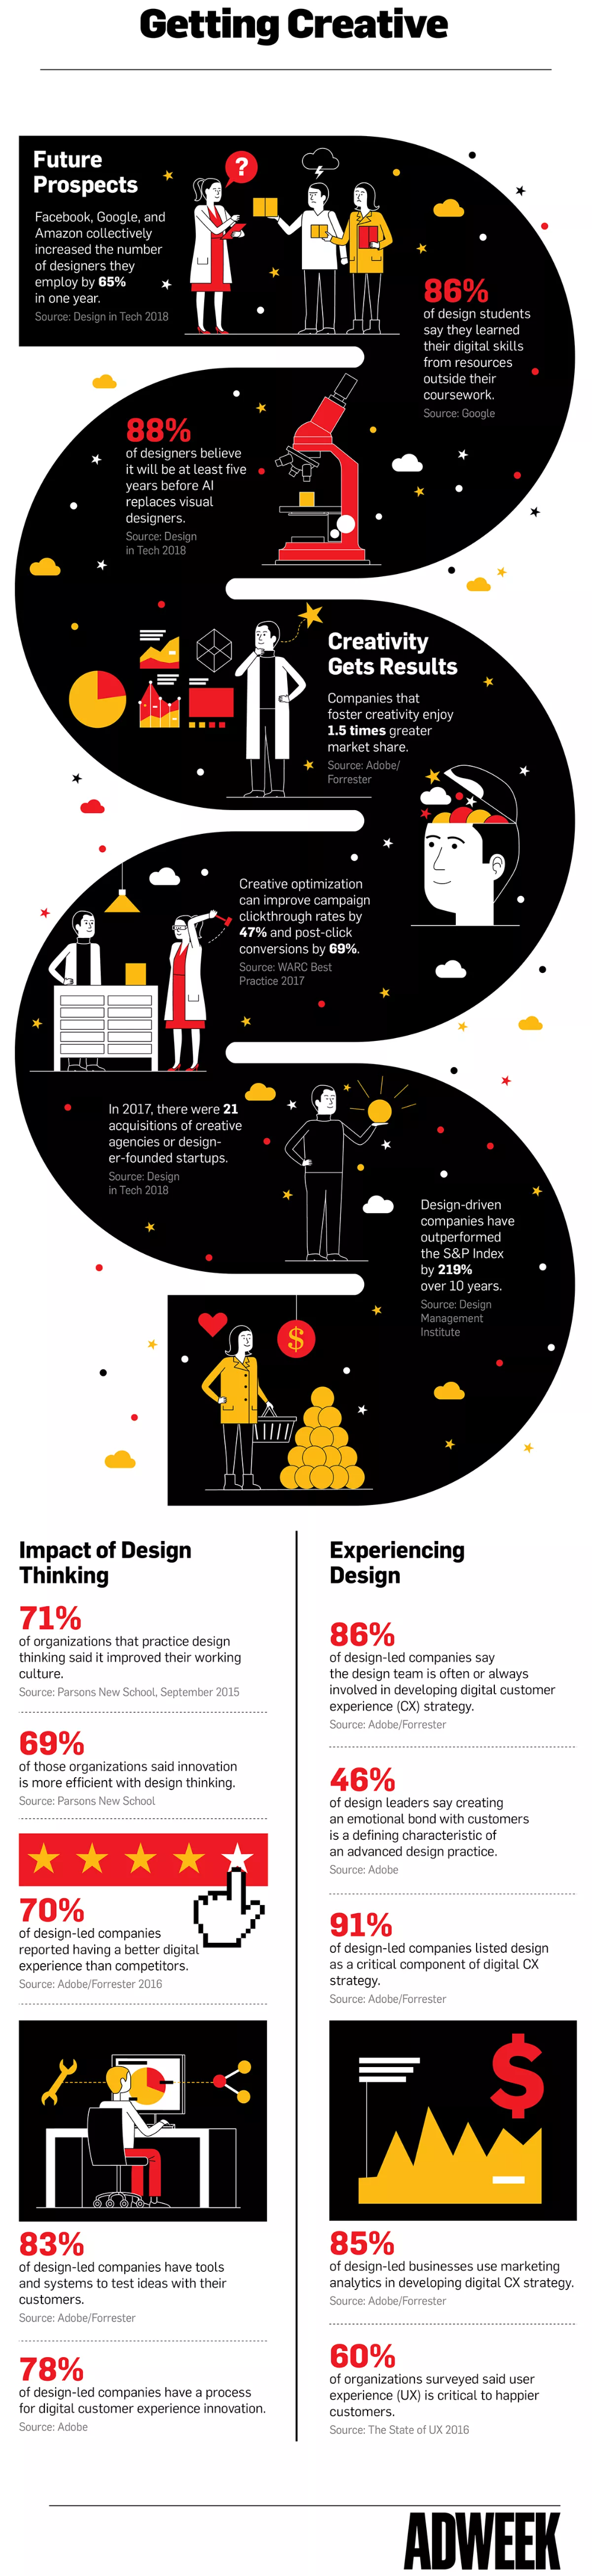 Infographic: Design Thinking Is Improving Customer Experience and Getting Results for Brands